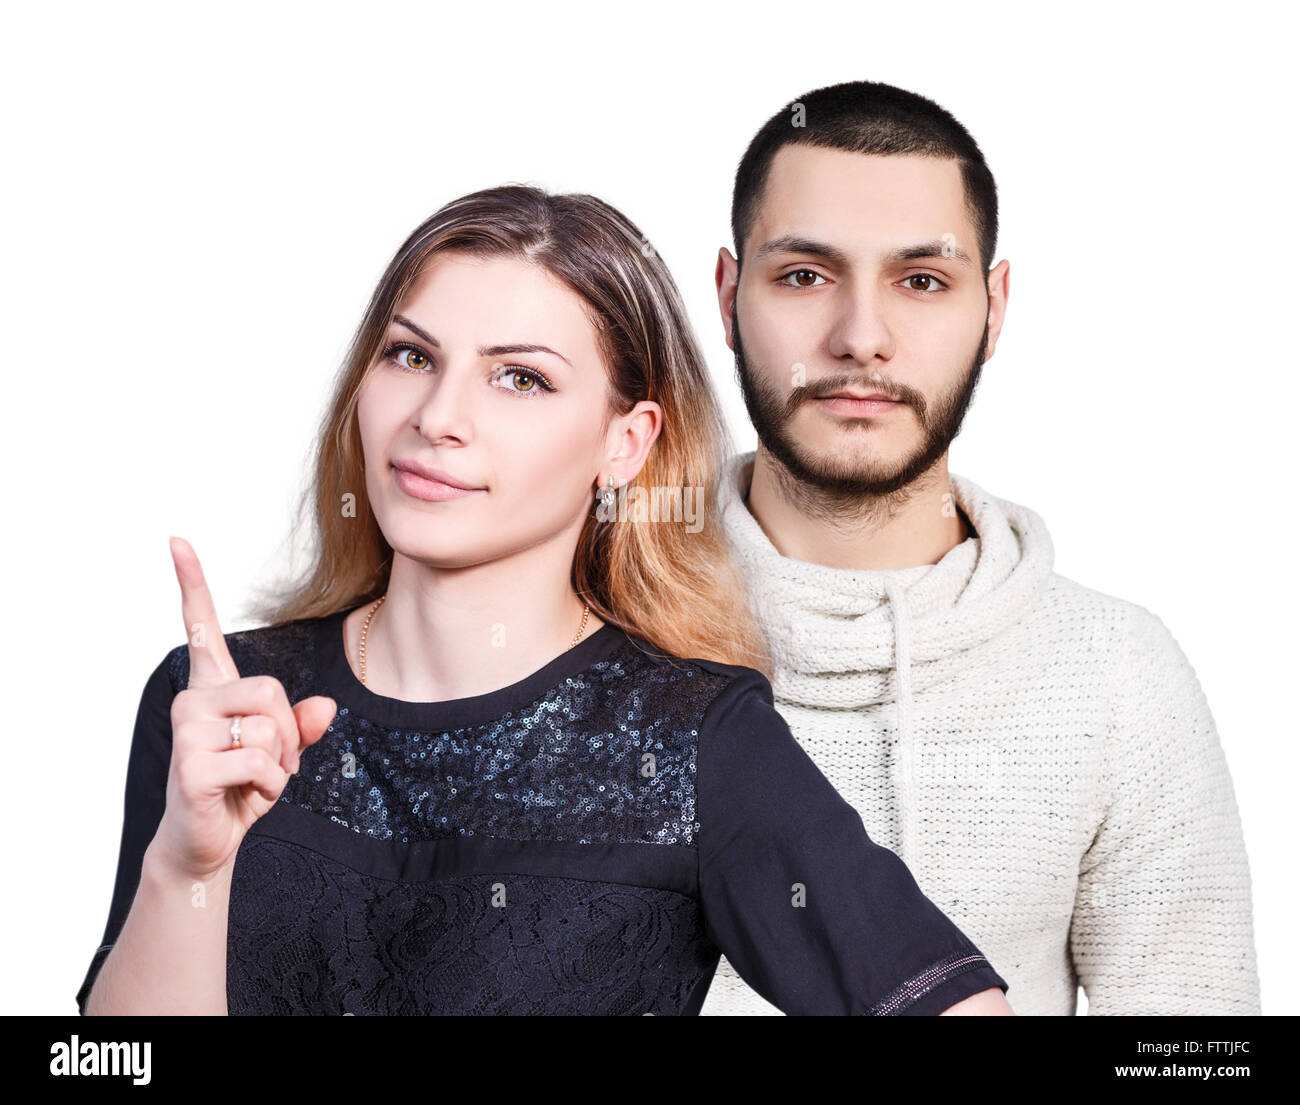 Young couple in spat Stock Photo